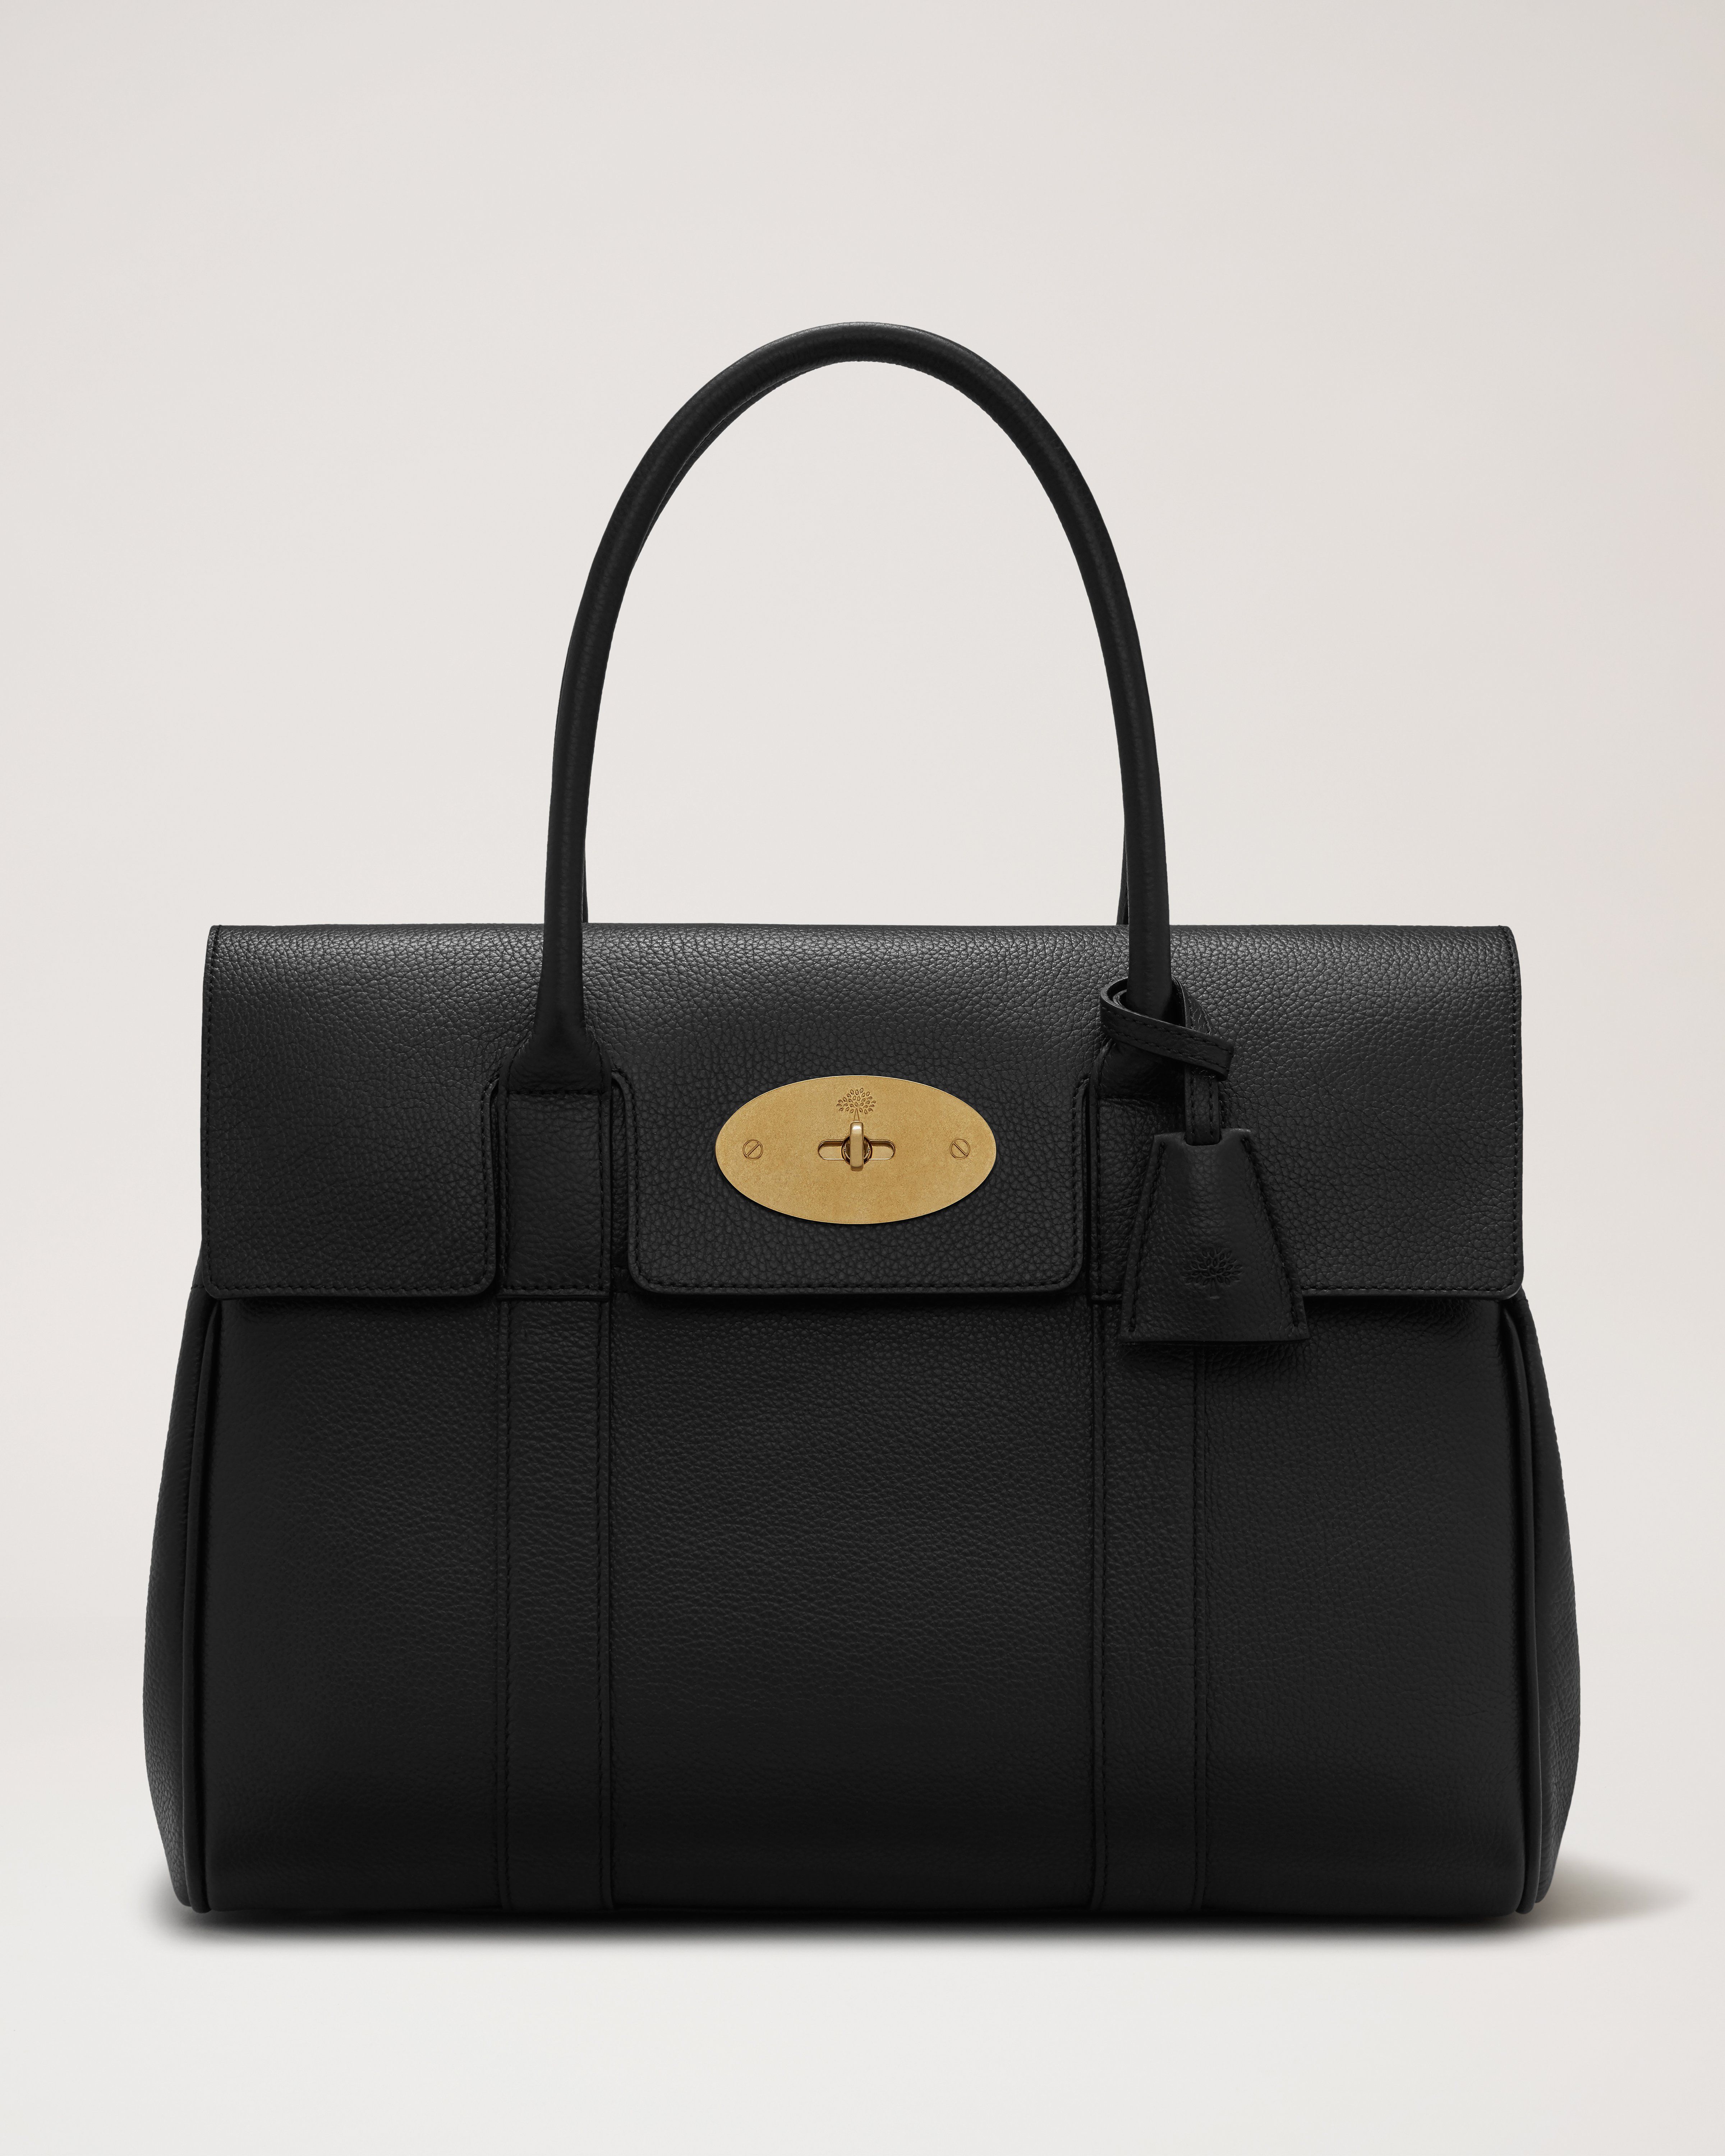 Mulberry Bayswater Small Classic Grain Leather Backpack, Black